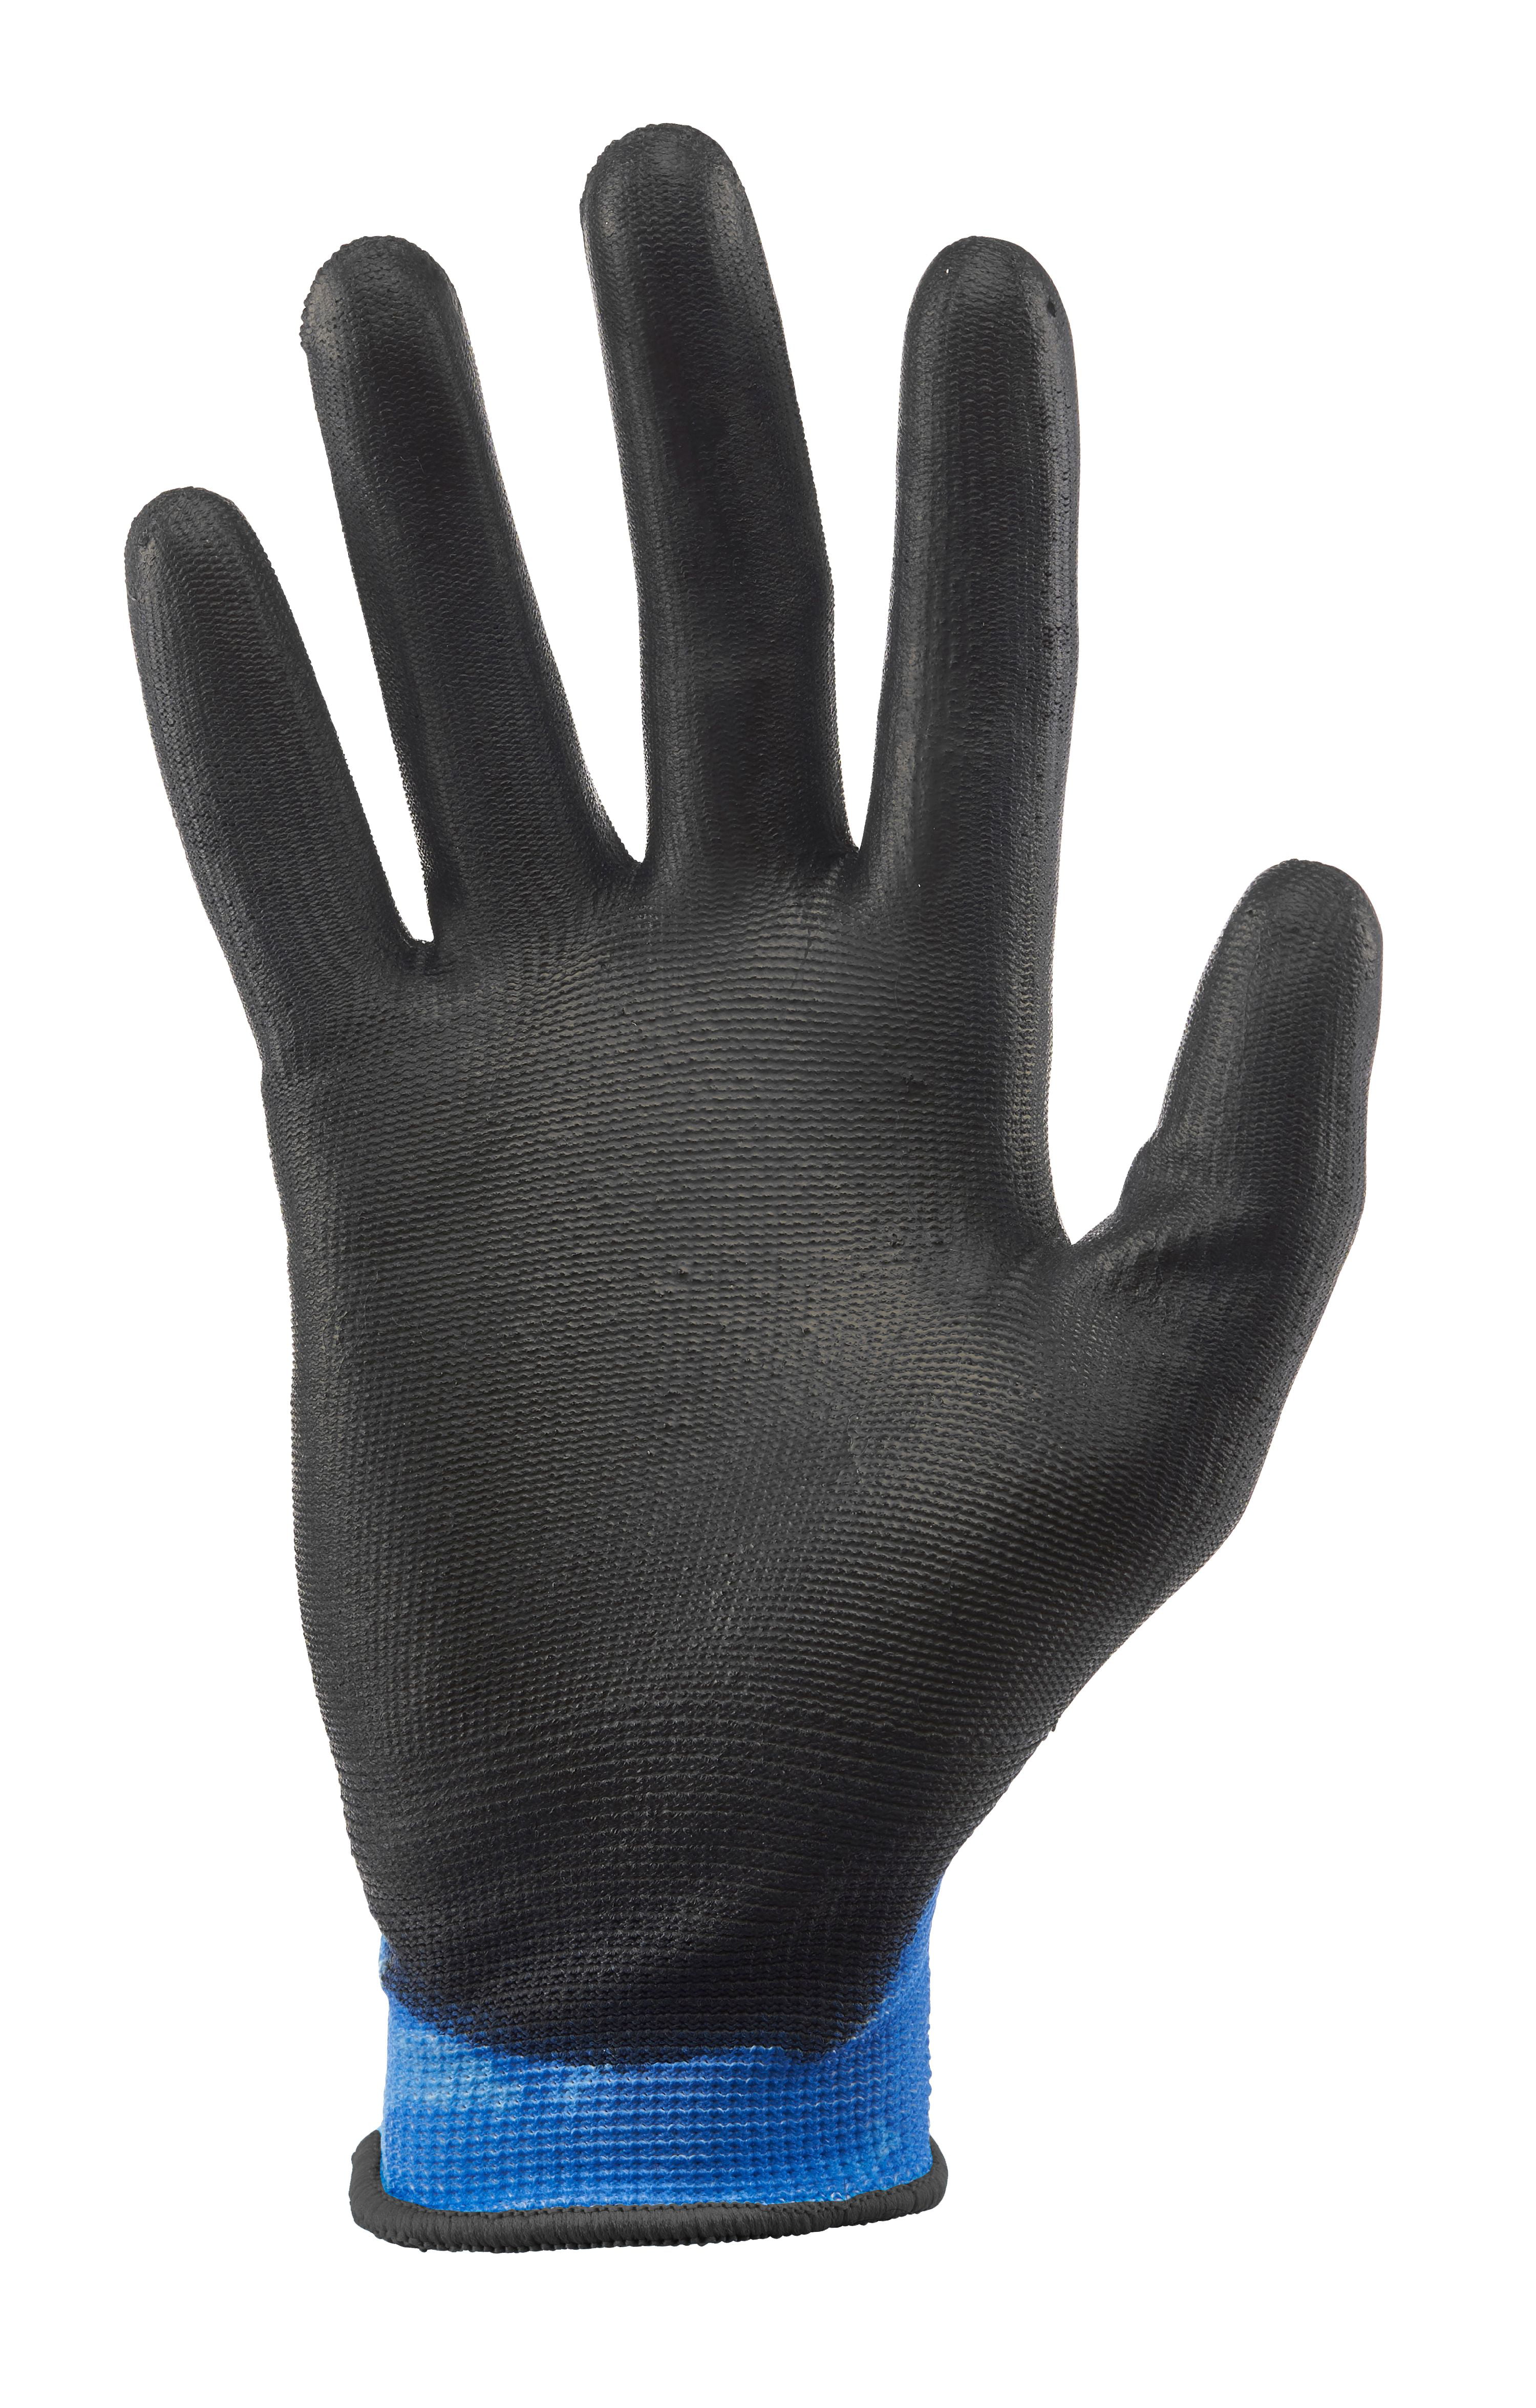 Big Time Products 255989 Gorilla Grip Tac Glove for Mens, Extra